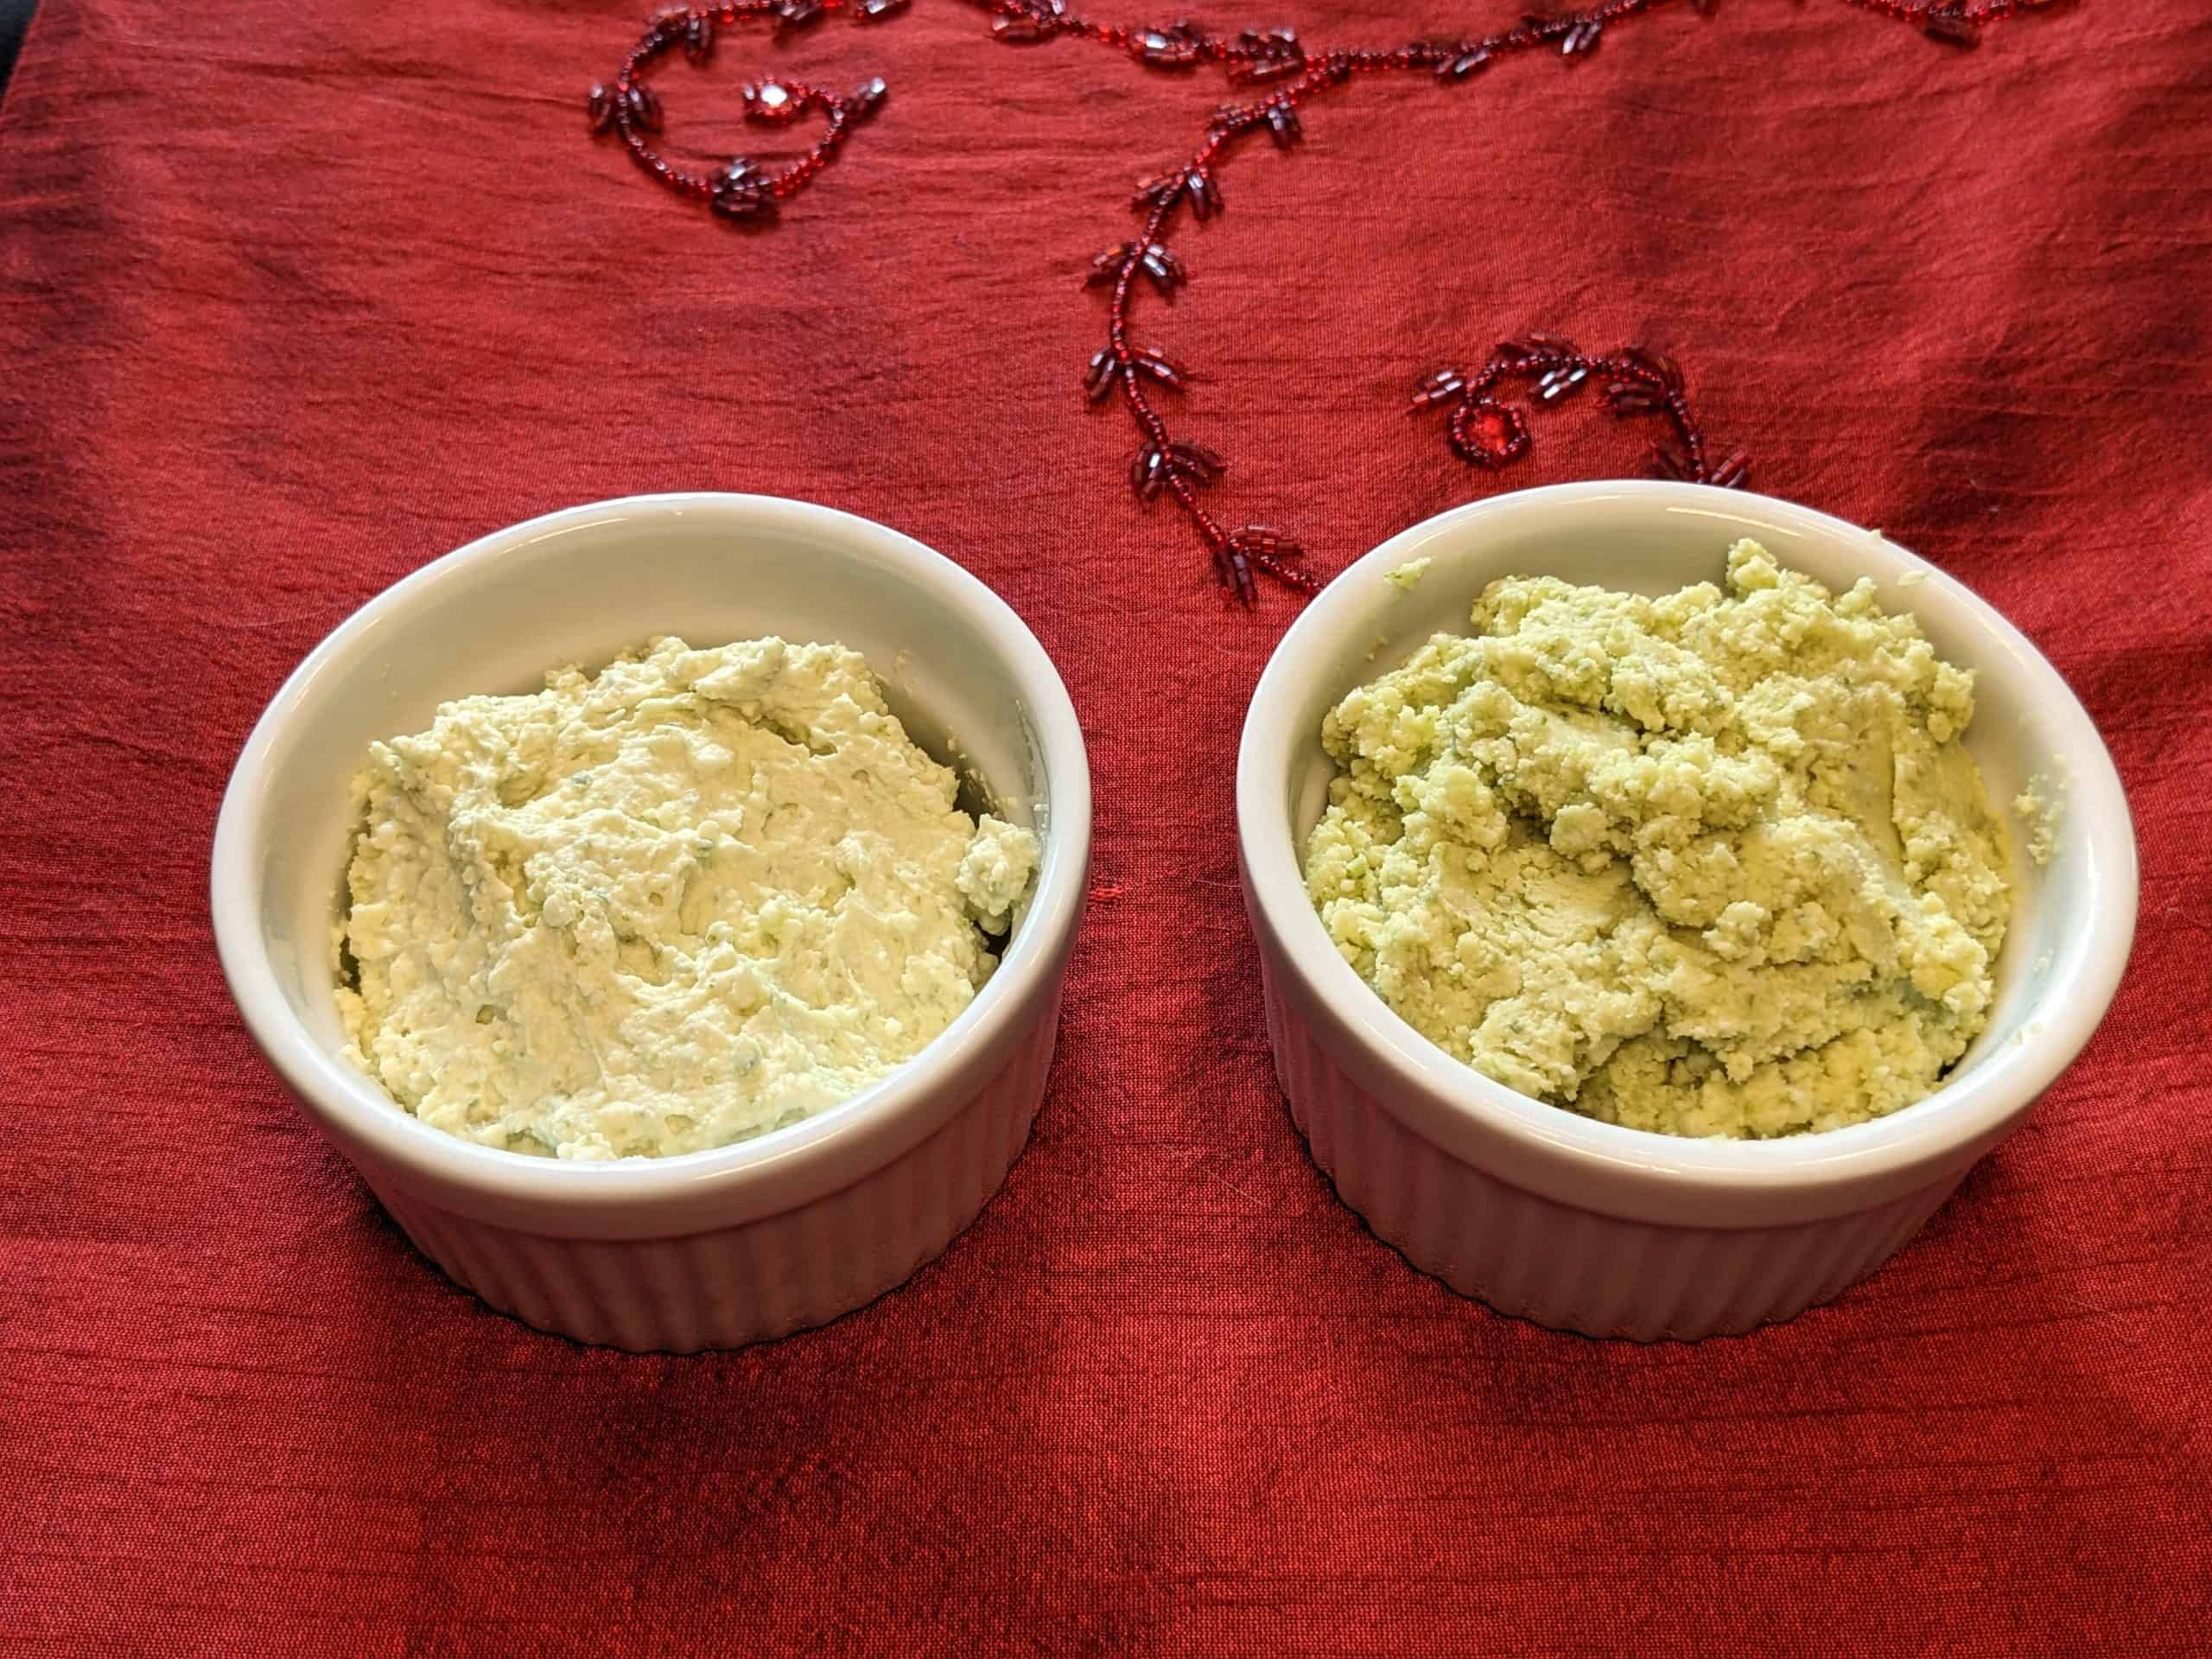 Whipped Pesto Spread and Dip in small bowls